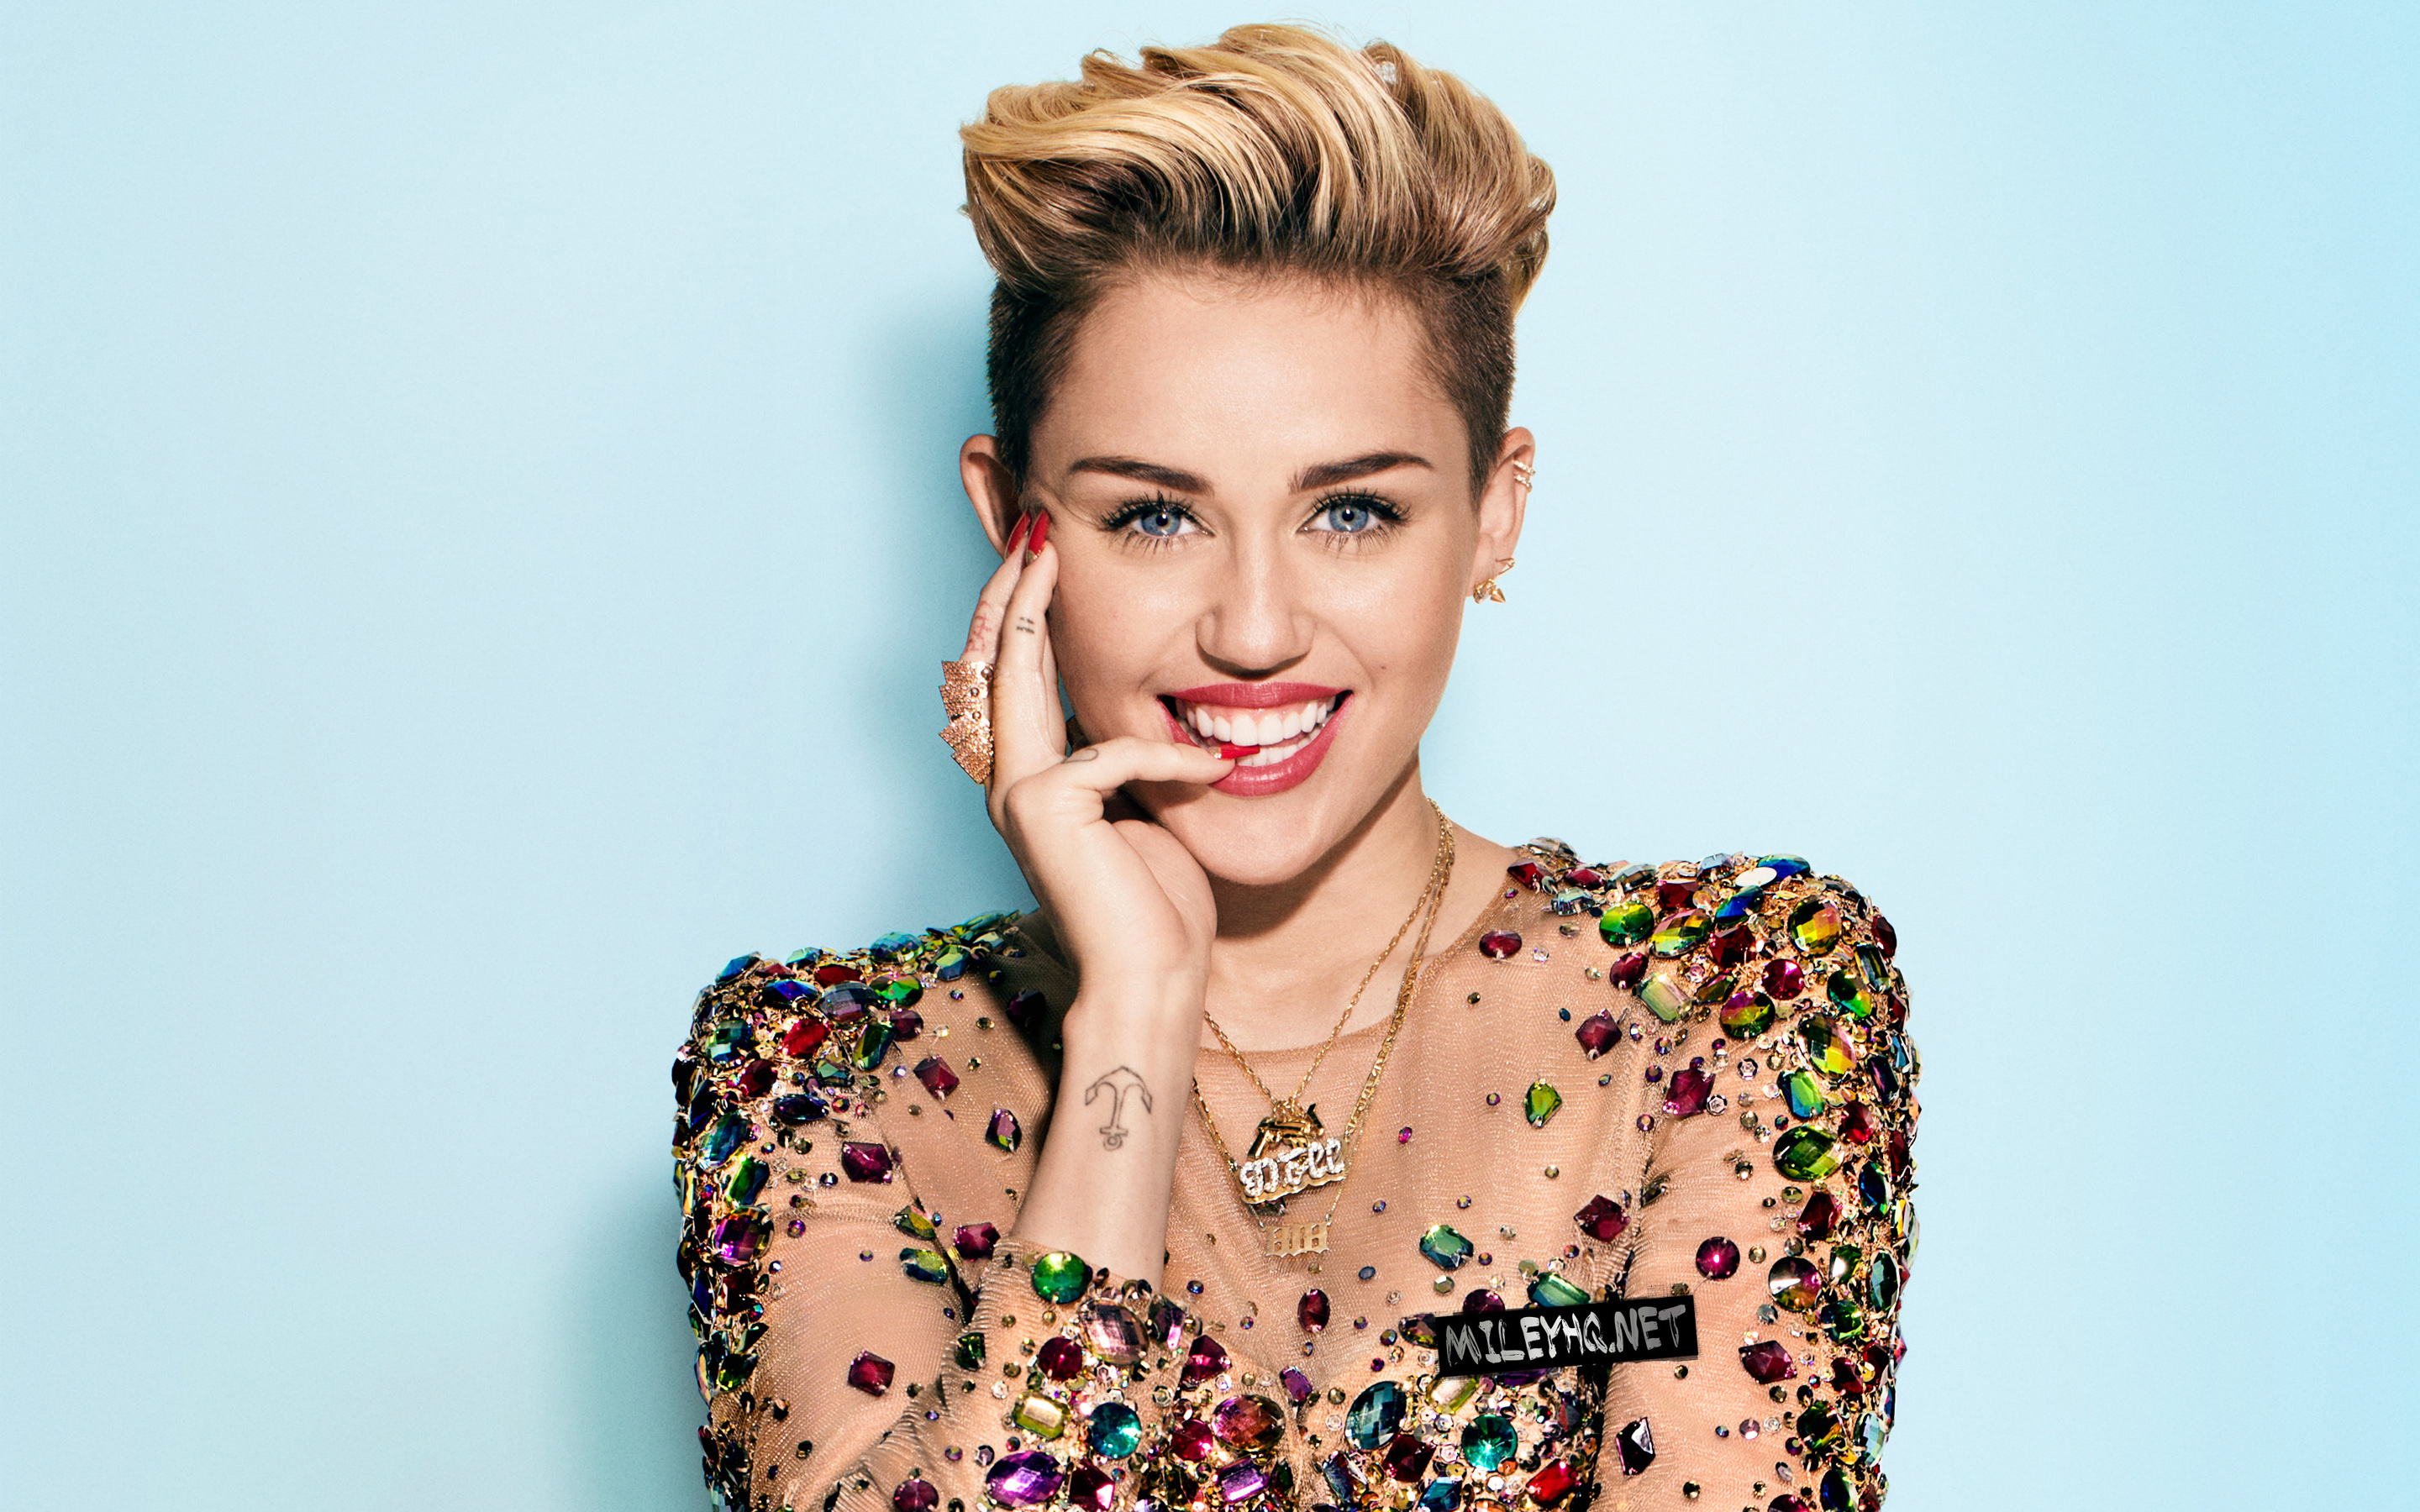 Music Miley Cyrus HD Wallpaper | Background Image